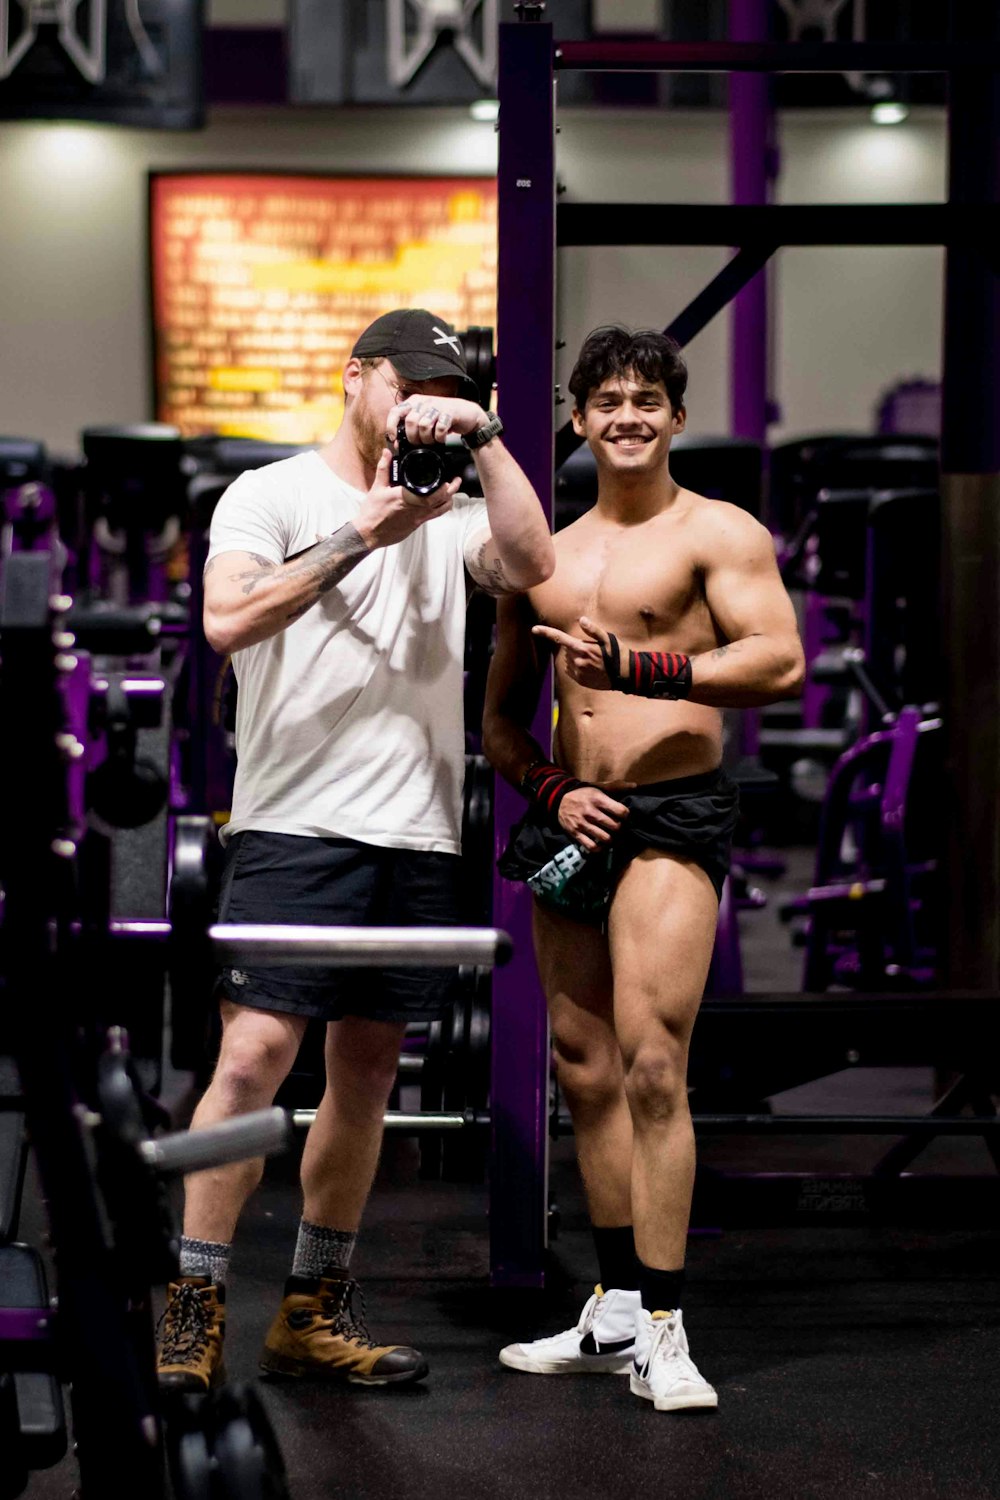 a man taking a picture of another man in a gym